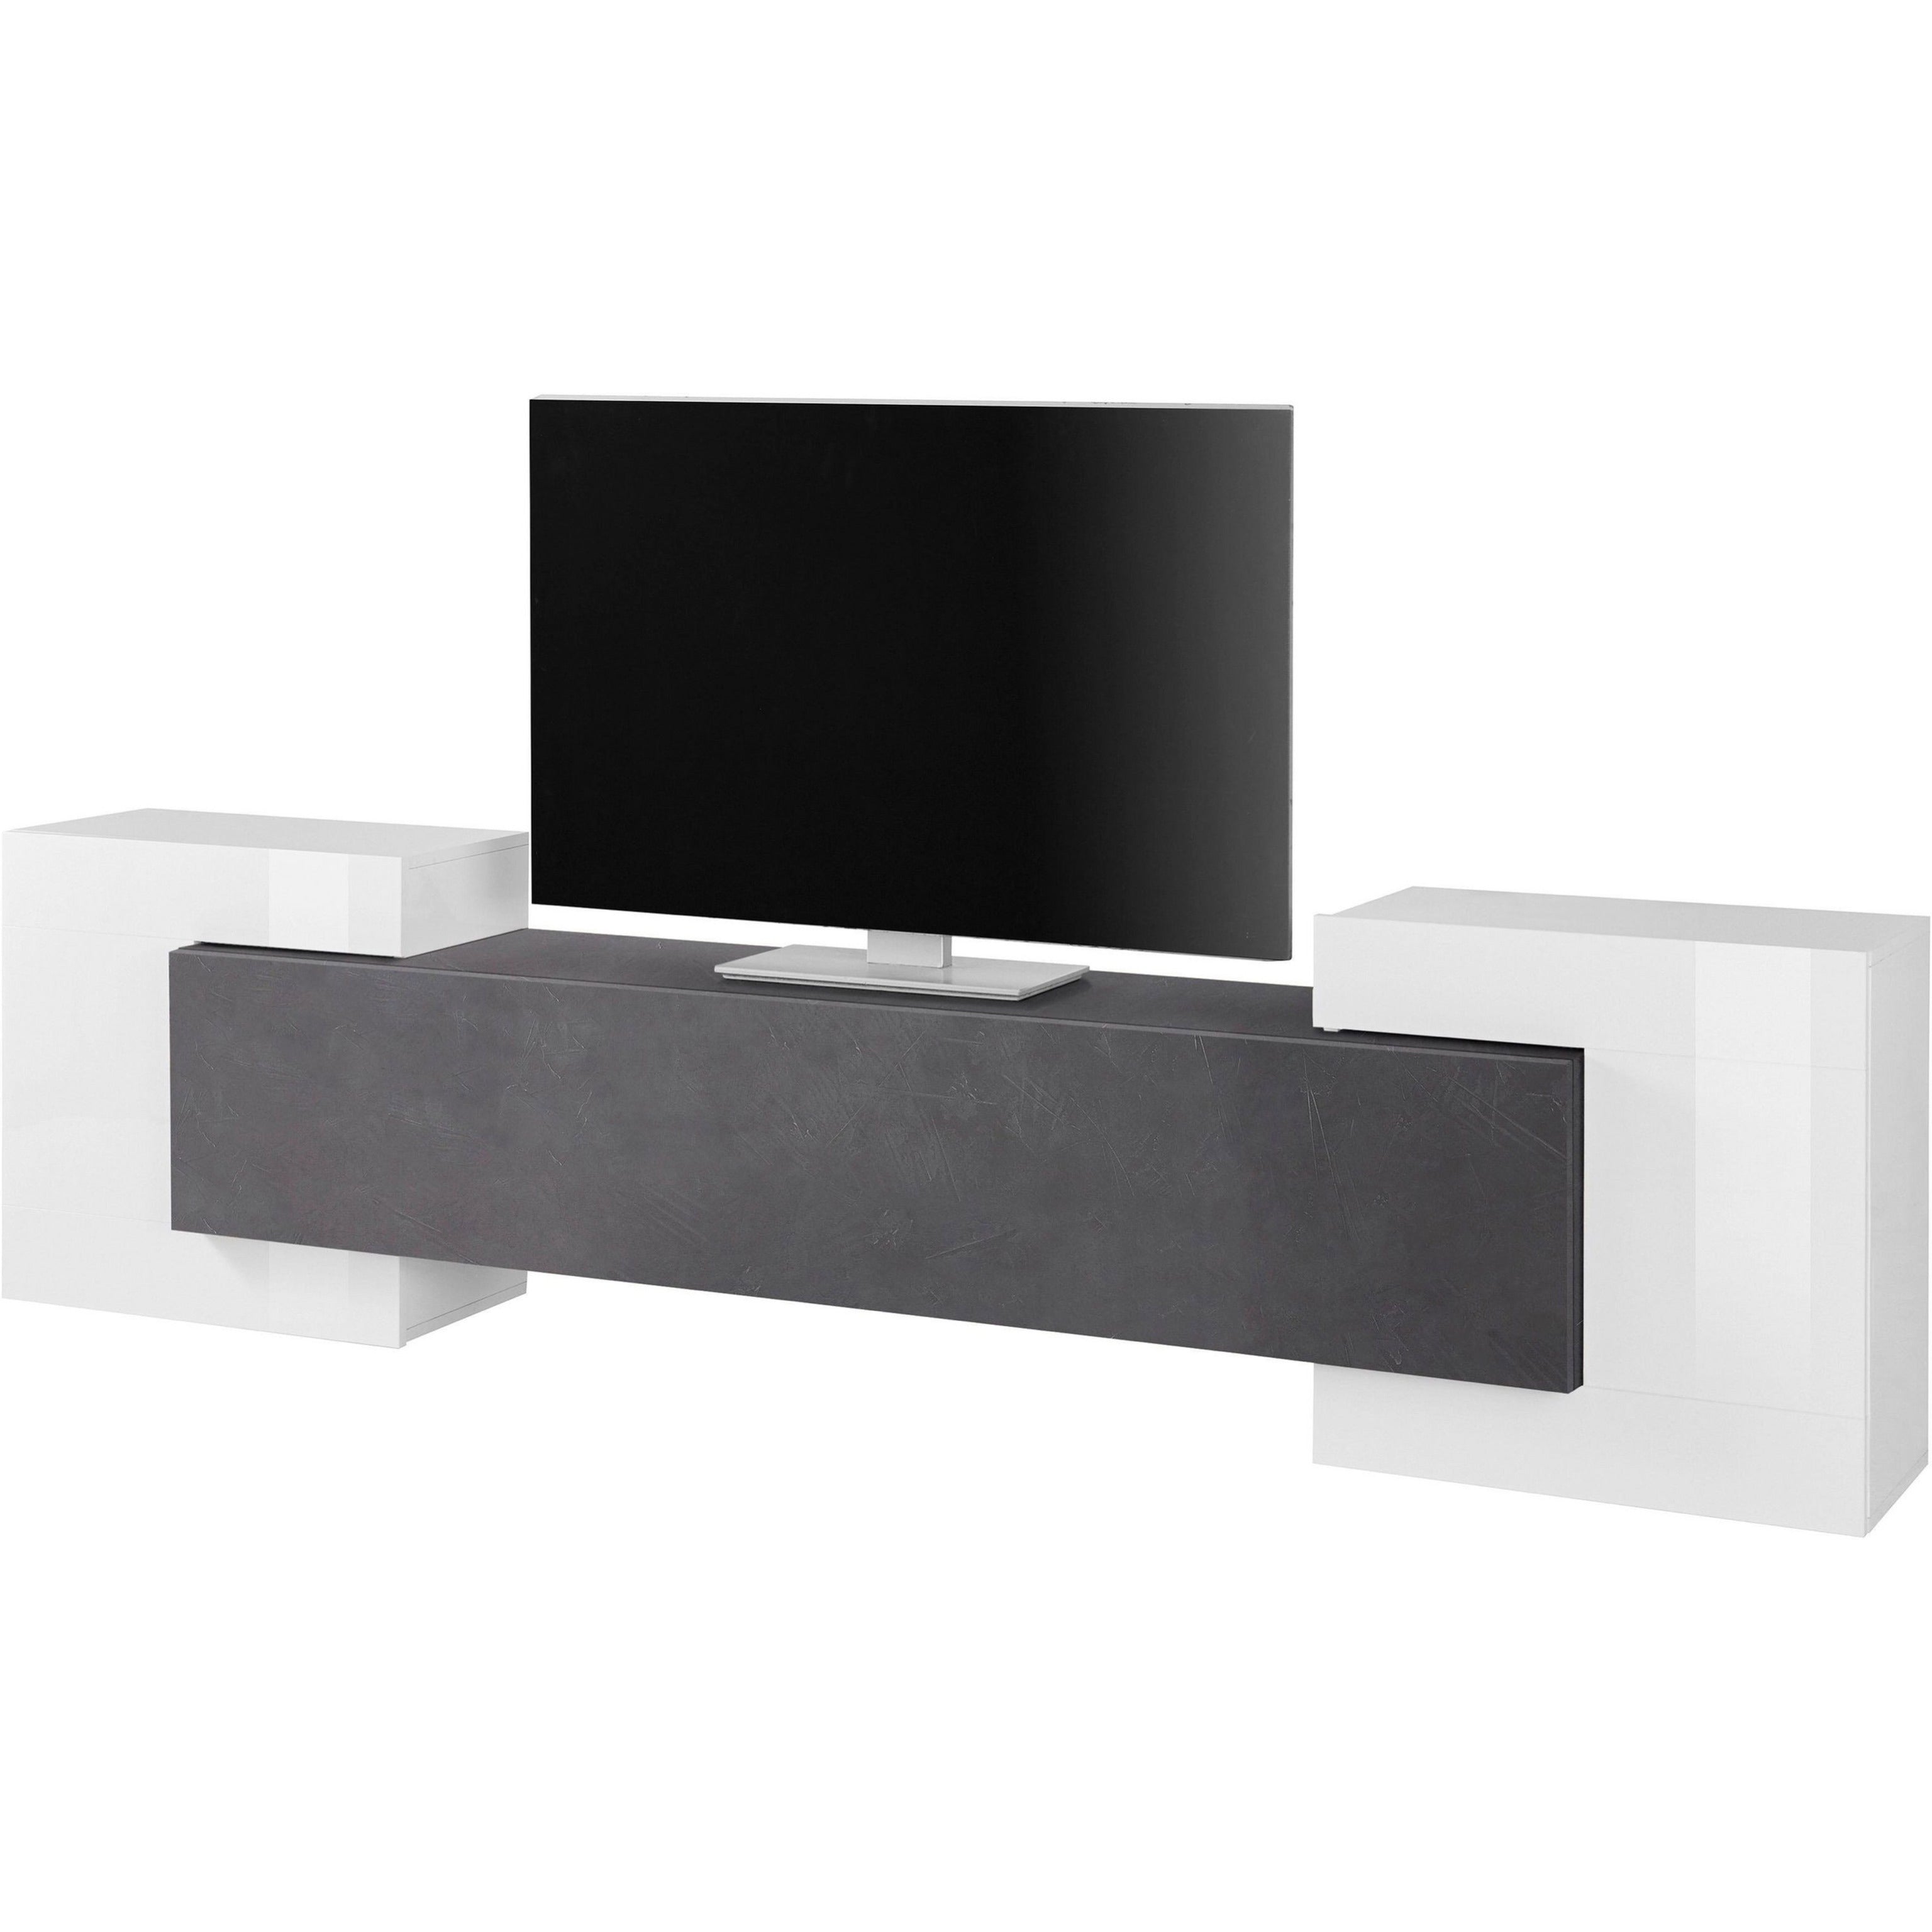 NEW Slave 94-inch TV Stand for TVs up to 88" - Furniture.Agency